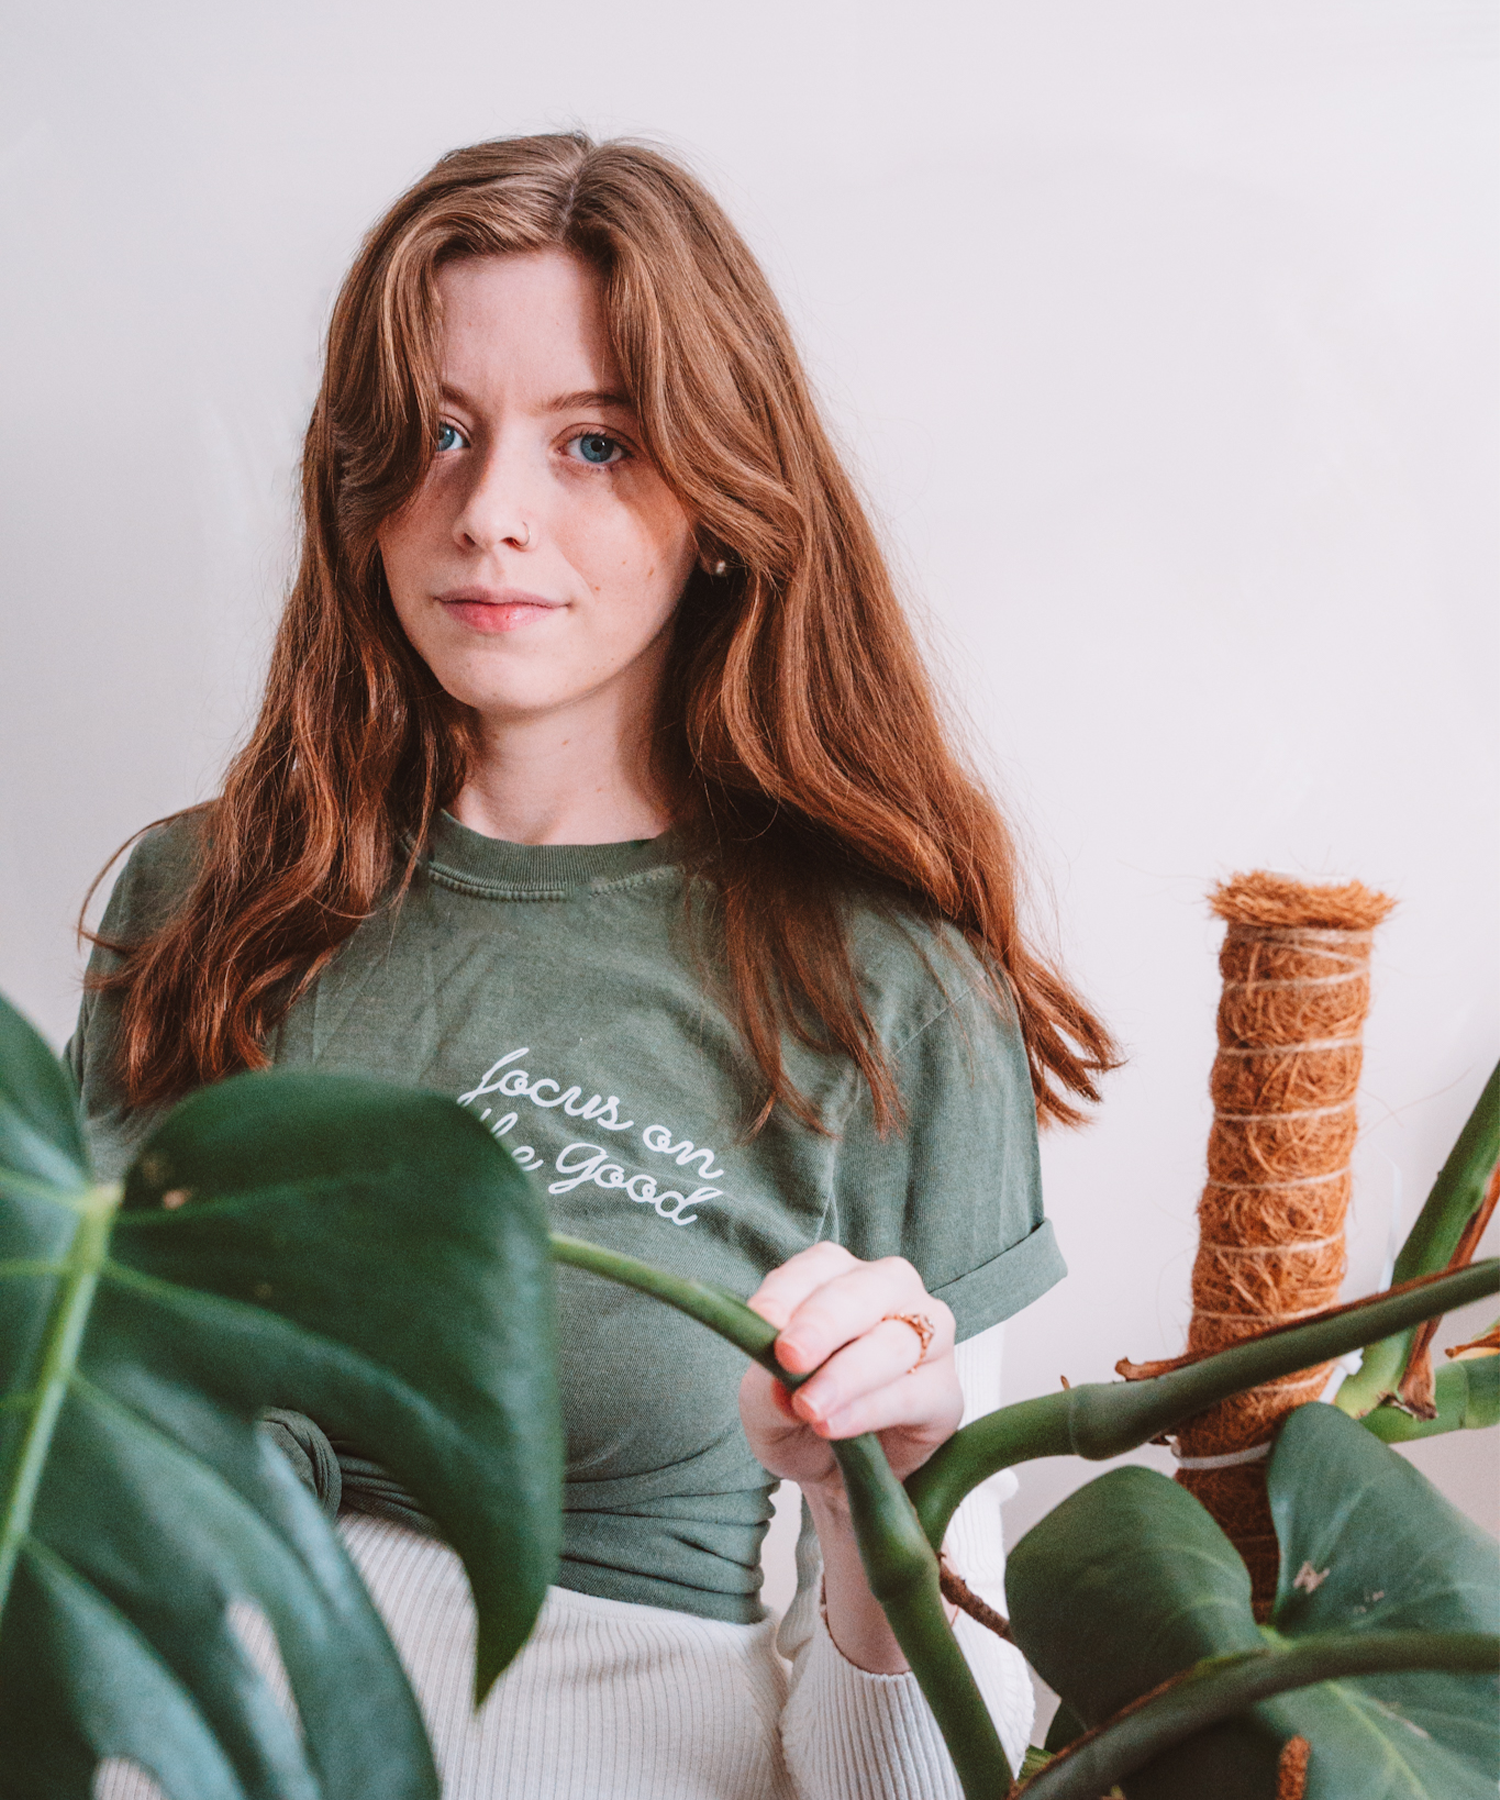 A model is posed behind a monstera plant. She is wearing the "Focus on the Good" t-shirt in moss, stylishly knotted in the front.